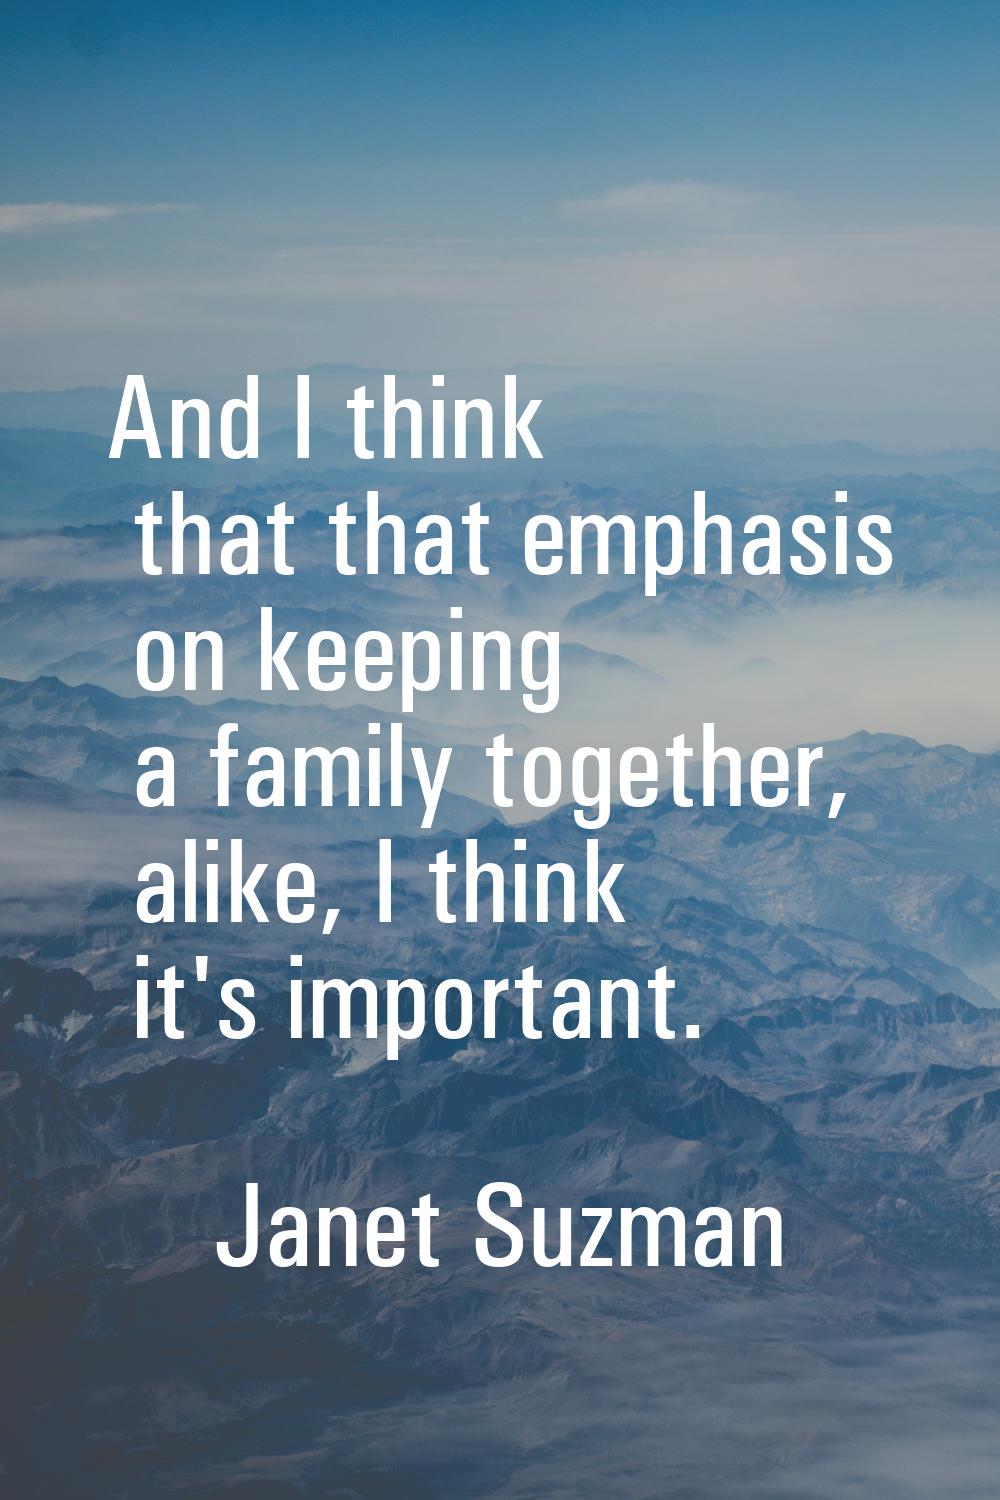 And I think that that emphasis on keeping a family together, alike, I think it's important.